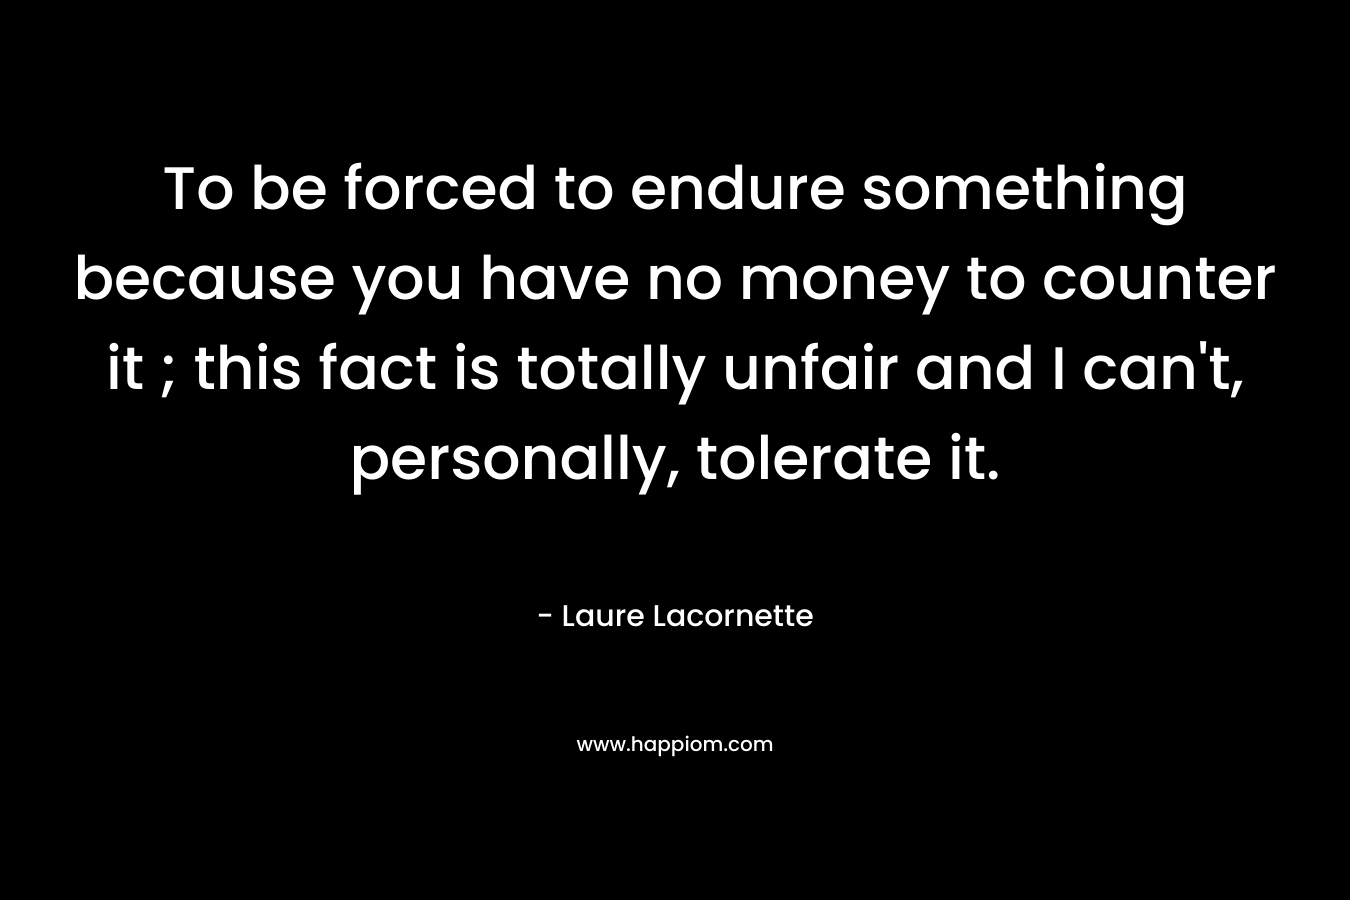 To be forced to endure something because you have no money to counter it ; this fact is totally unfair and I can't, personally, tolerate it.